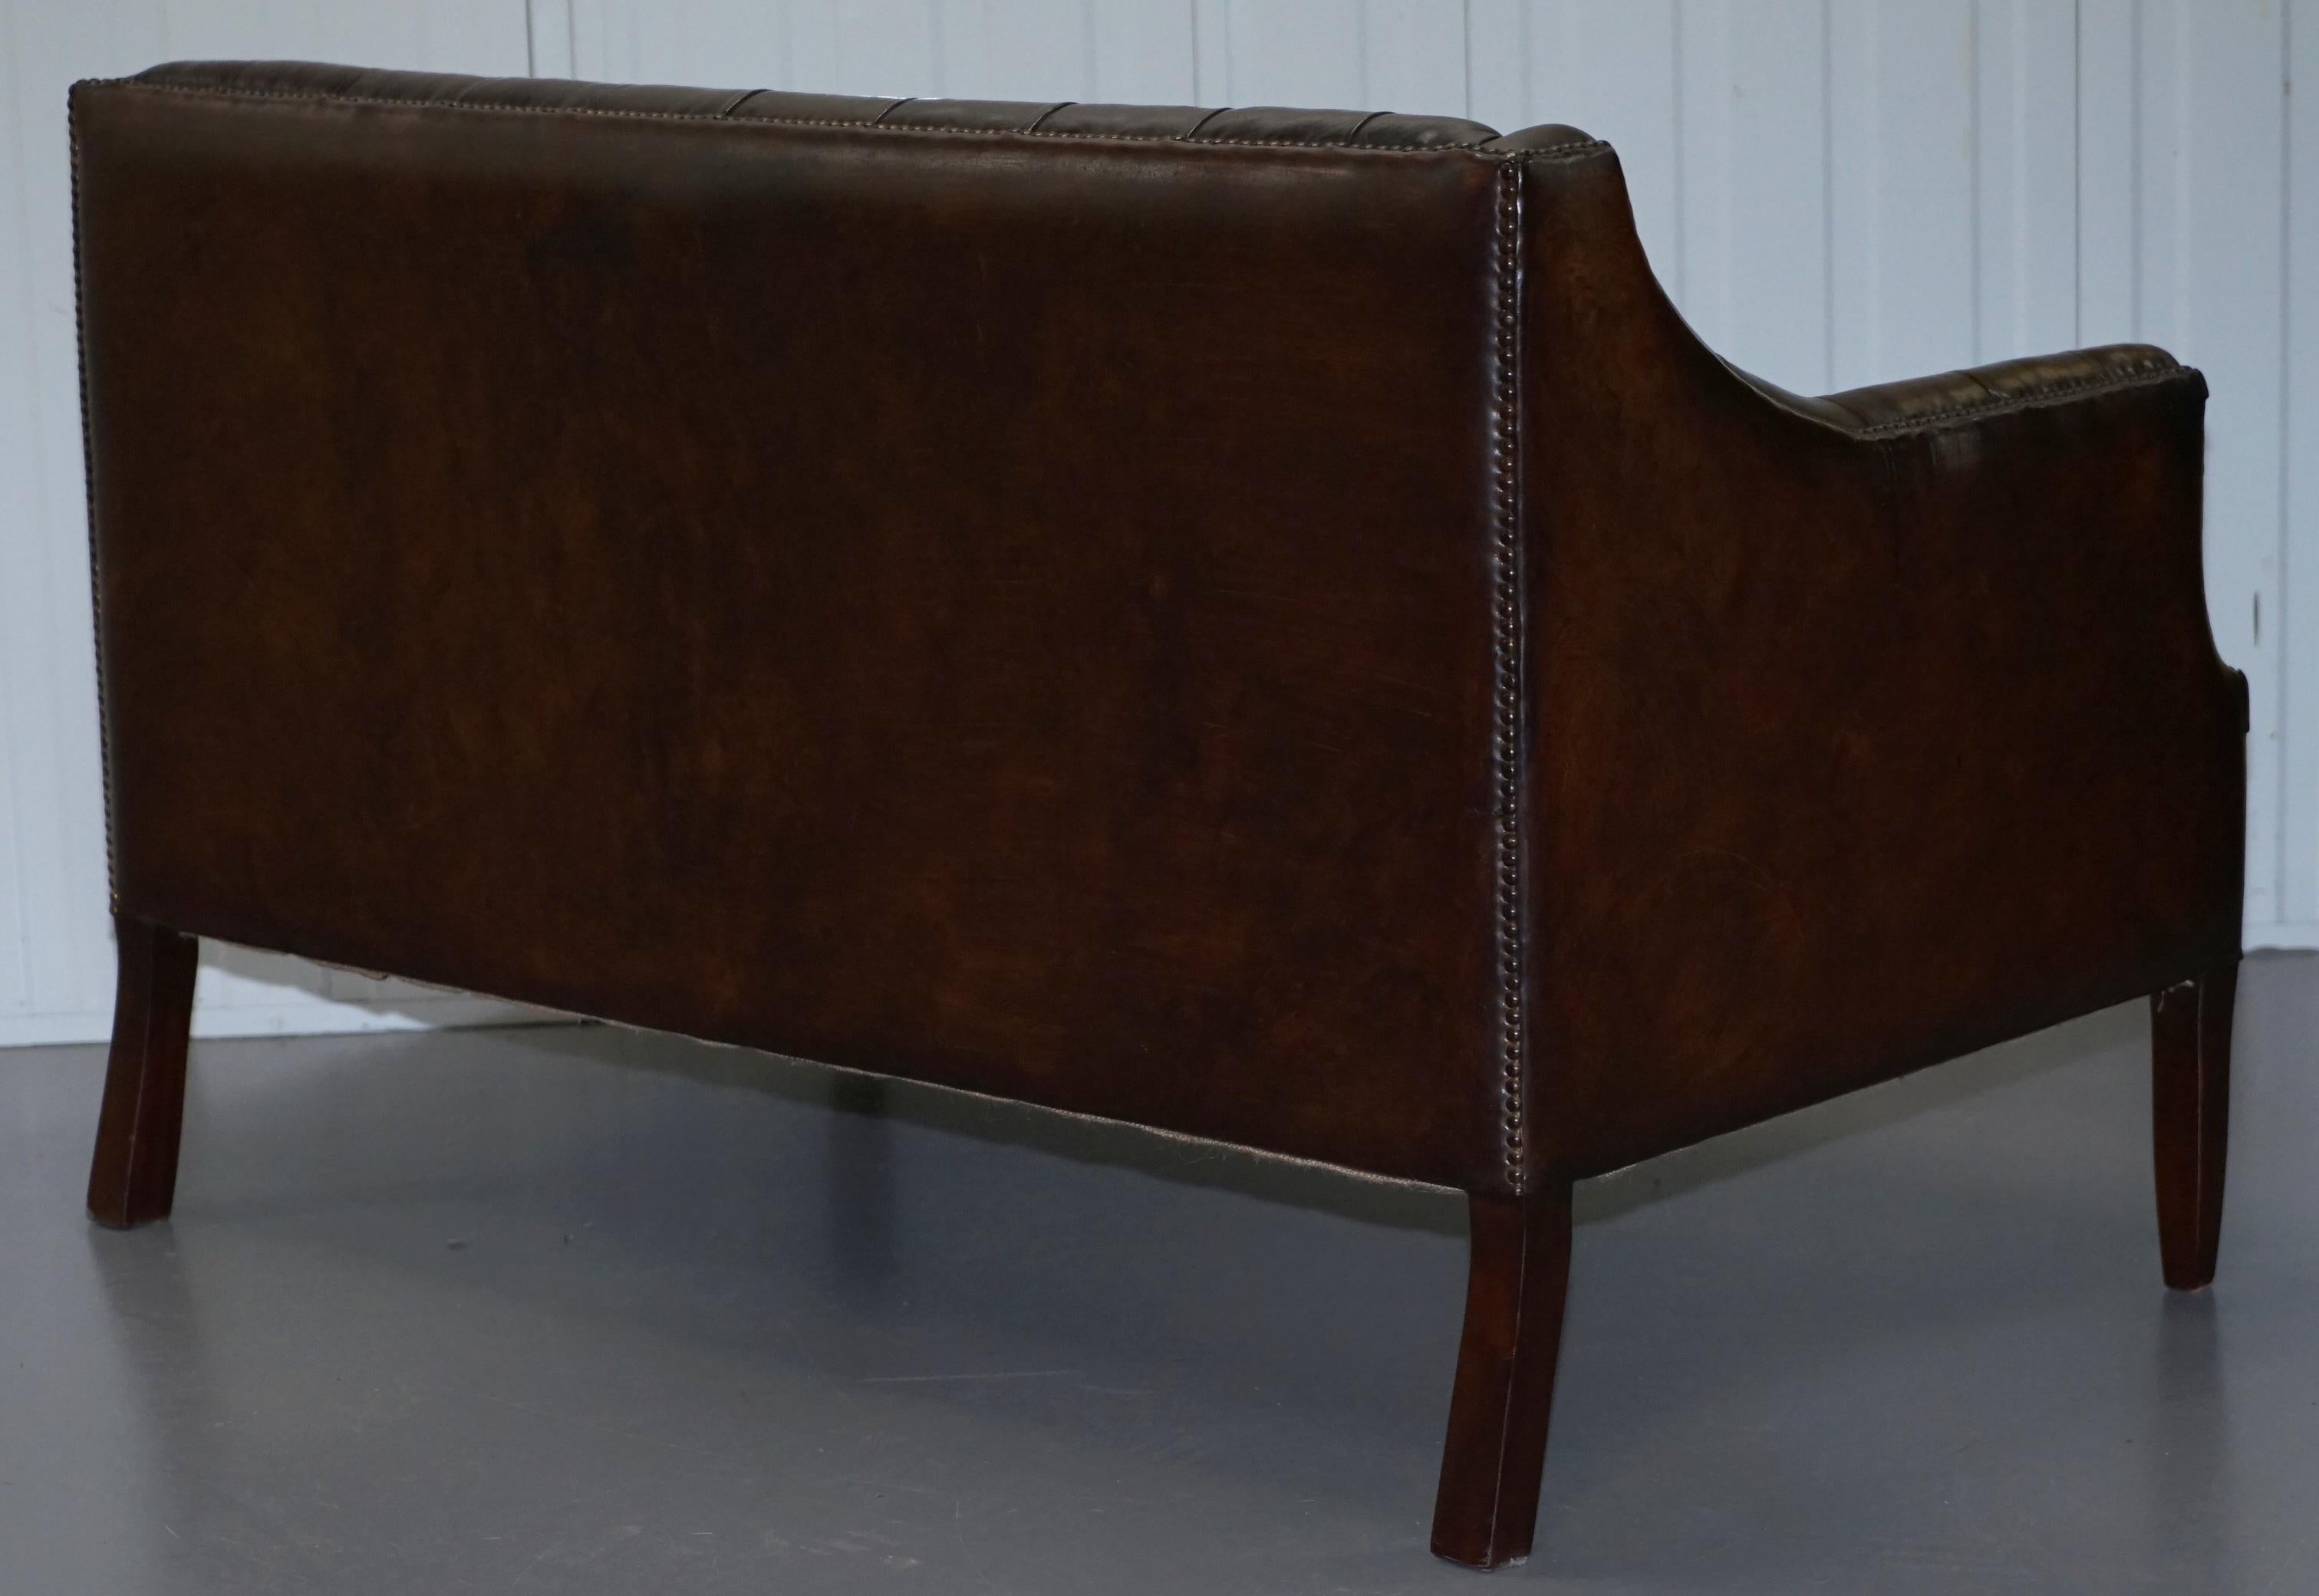 Restored Lutyen's Viceroy Chesterfield Brown Leather Two-Seat Sofa 9